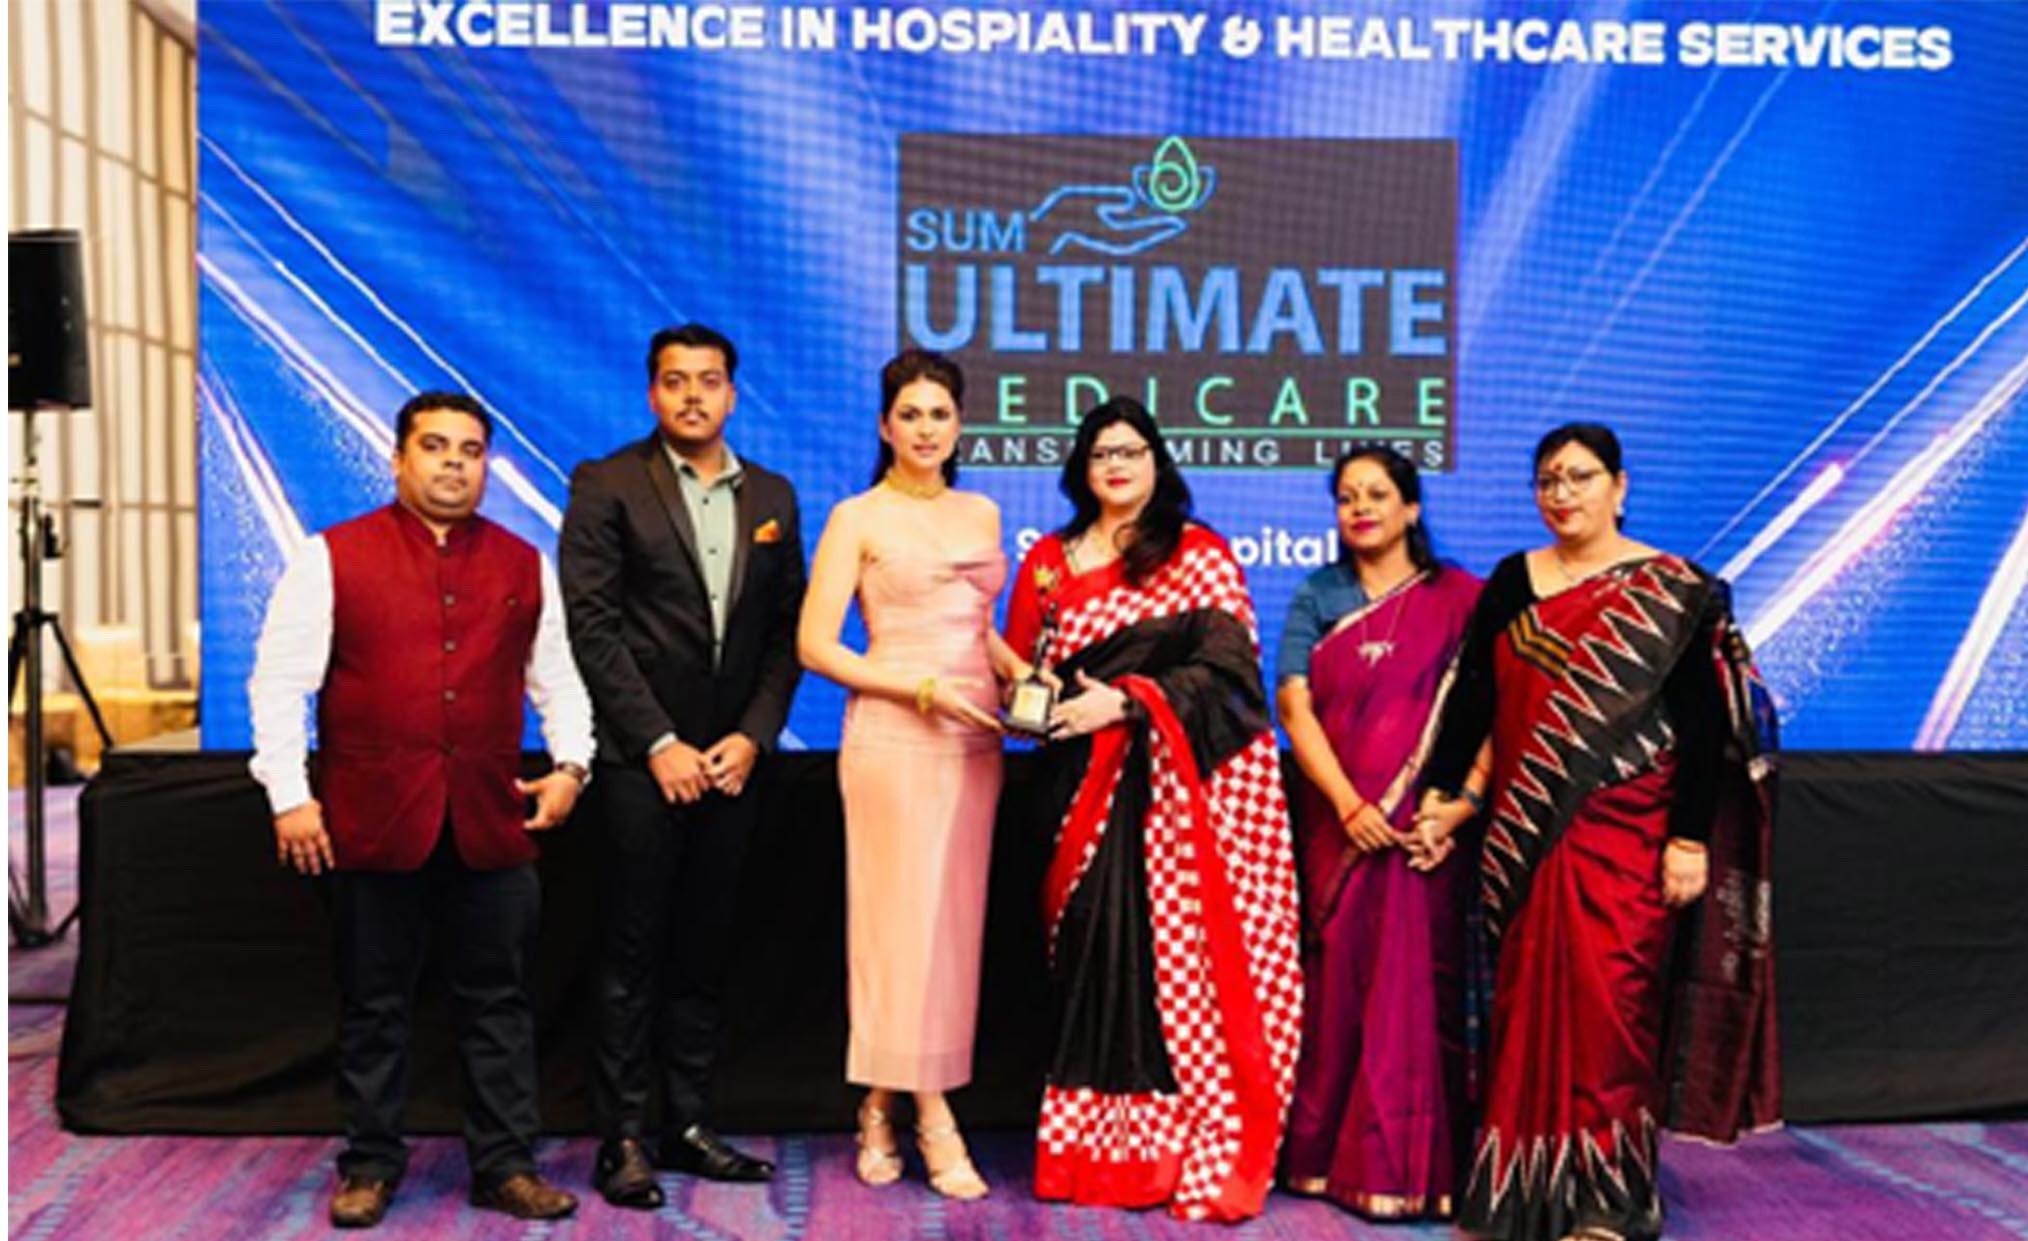 SUMUM Receives Excellence In Hospitality & Healthcare Service Award At Kuala Lumpur